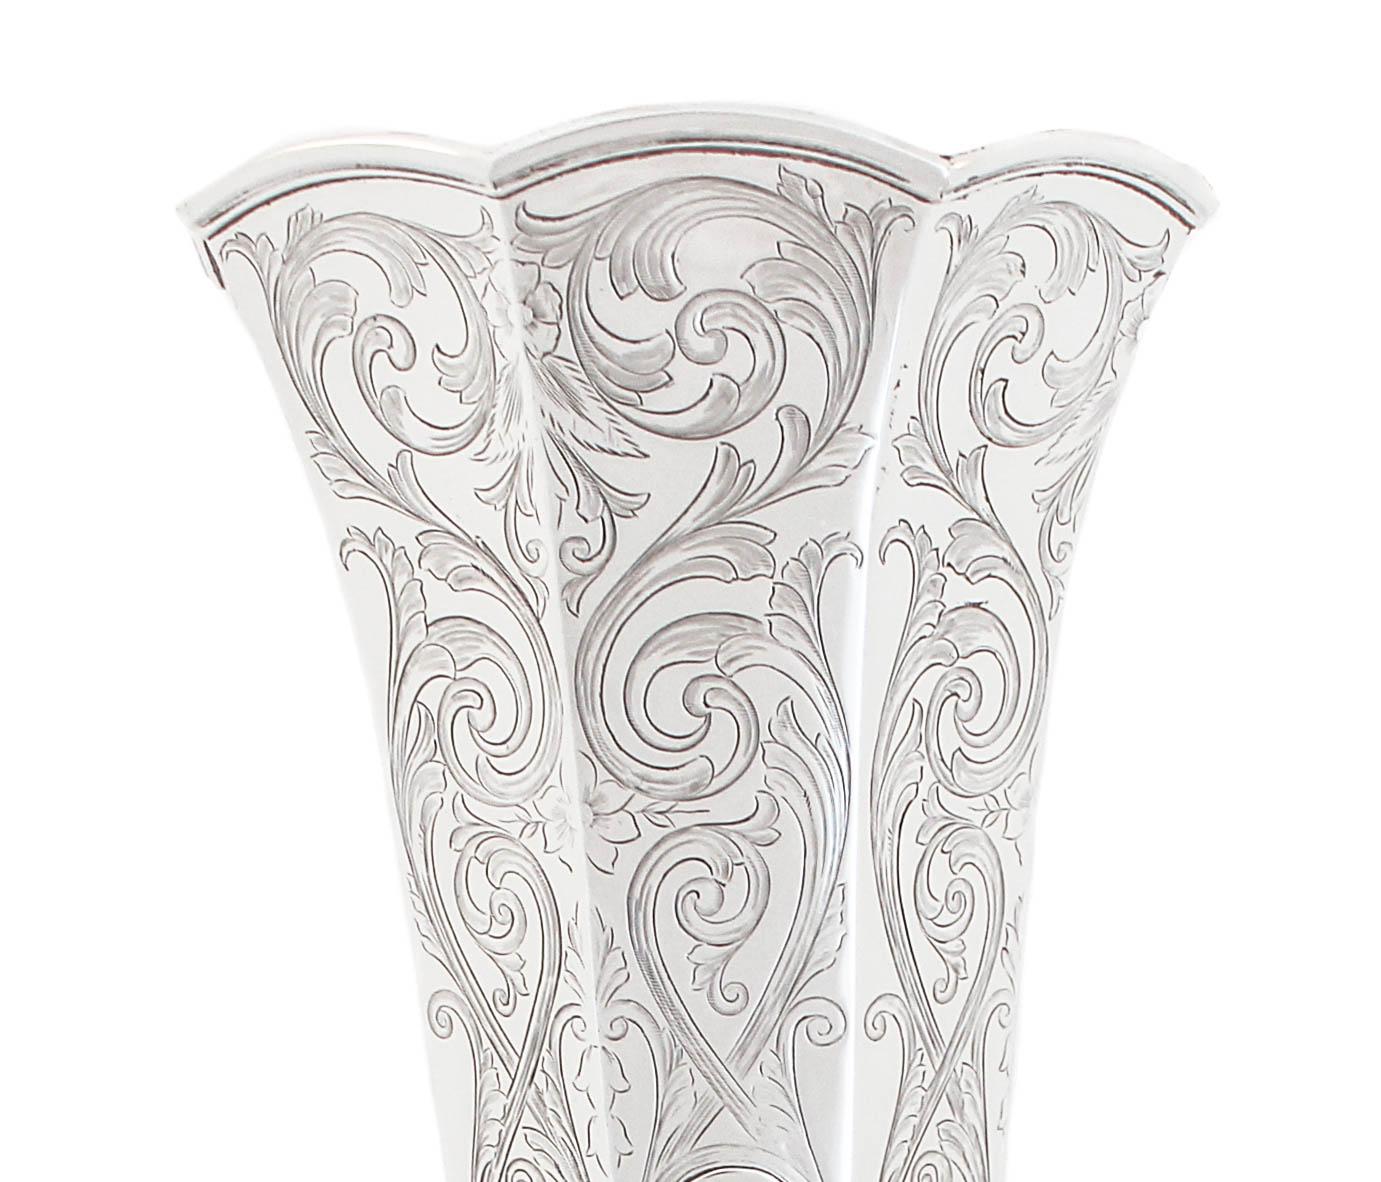 We are proud to offer you this extraordinary sterling silver vase by Gorham Silversmiths of Providence, Rhode Island.  It is from the late 1800’s, 19th century gilded age extravagance.  We have never had anything on this scale before; it is a